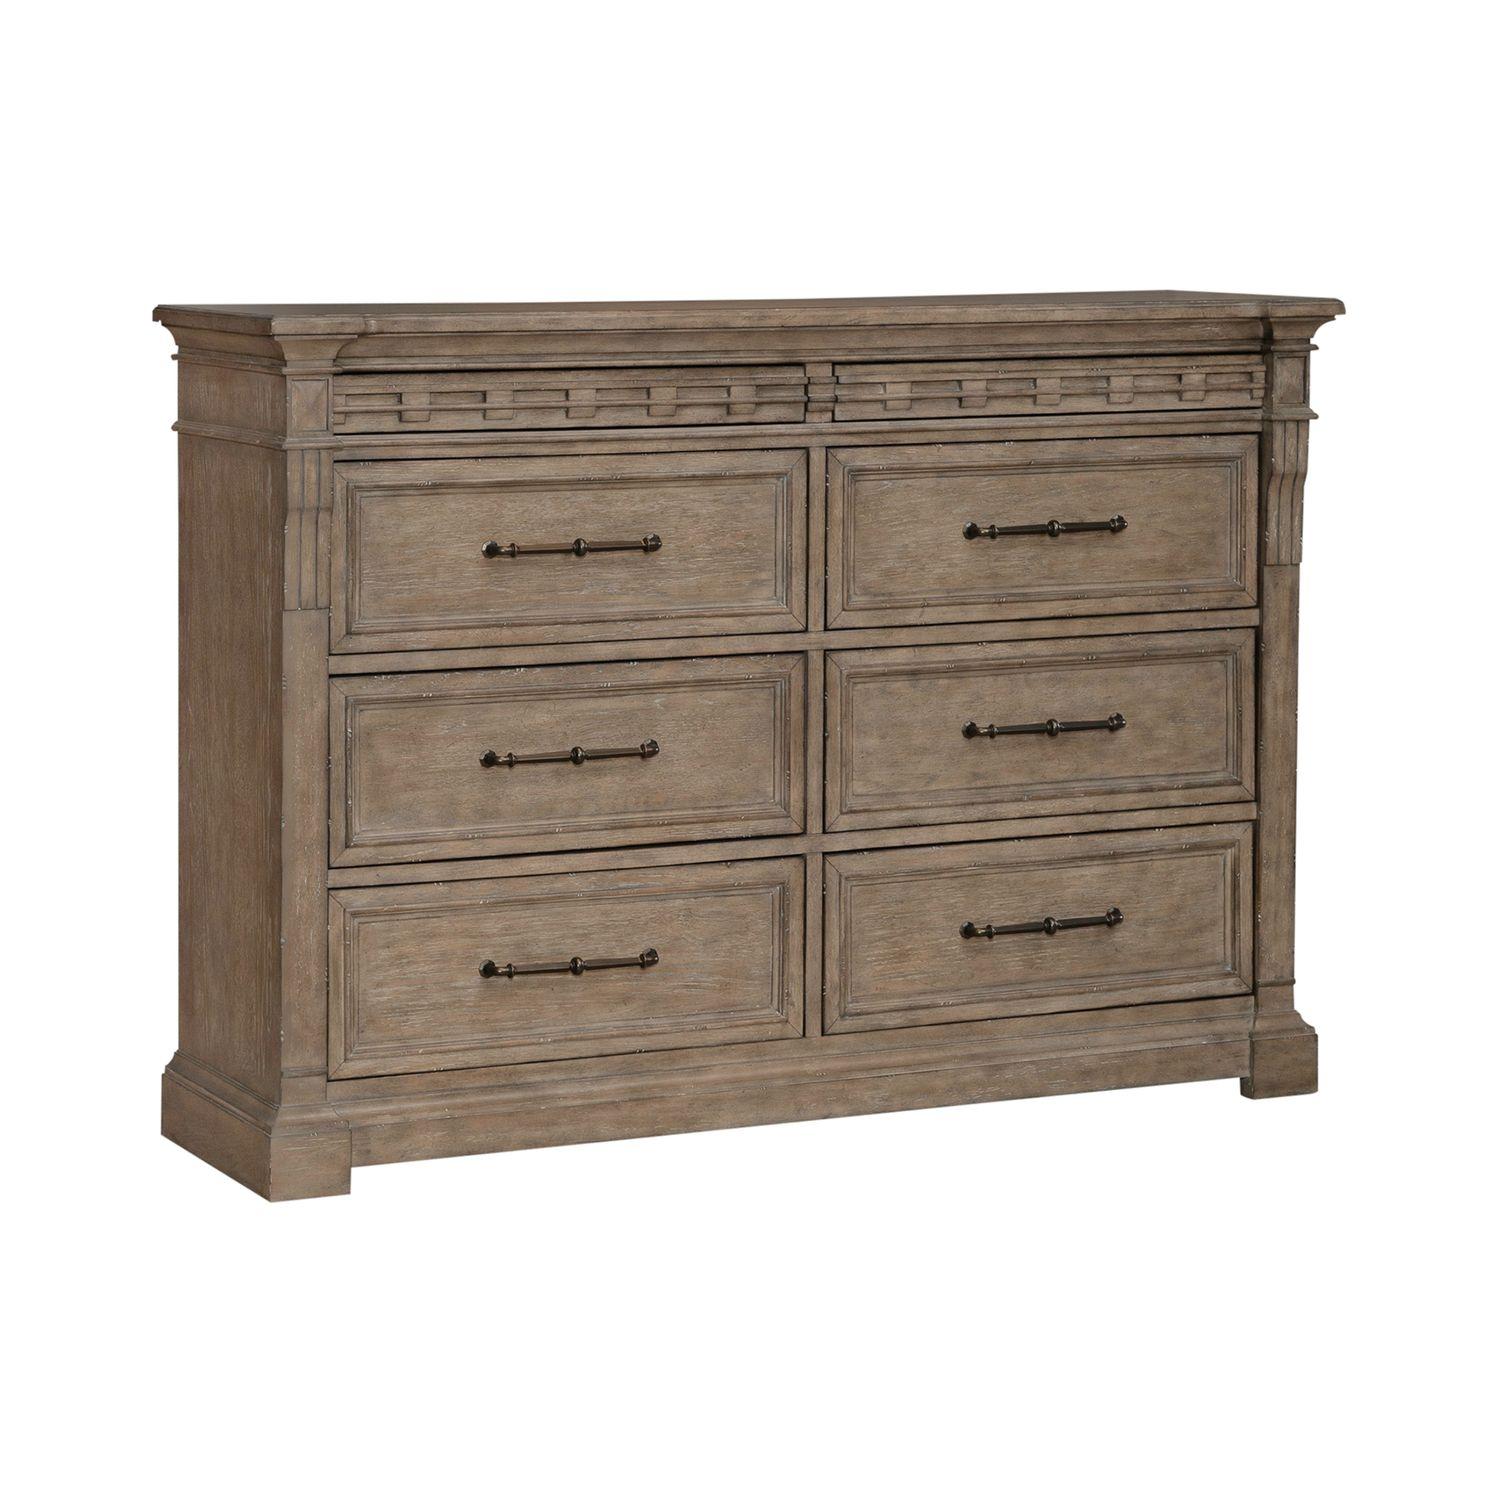 Transitional Double Dresser Town & Country (711-BR) 711-BR31 in Taupe 